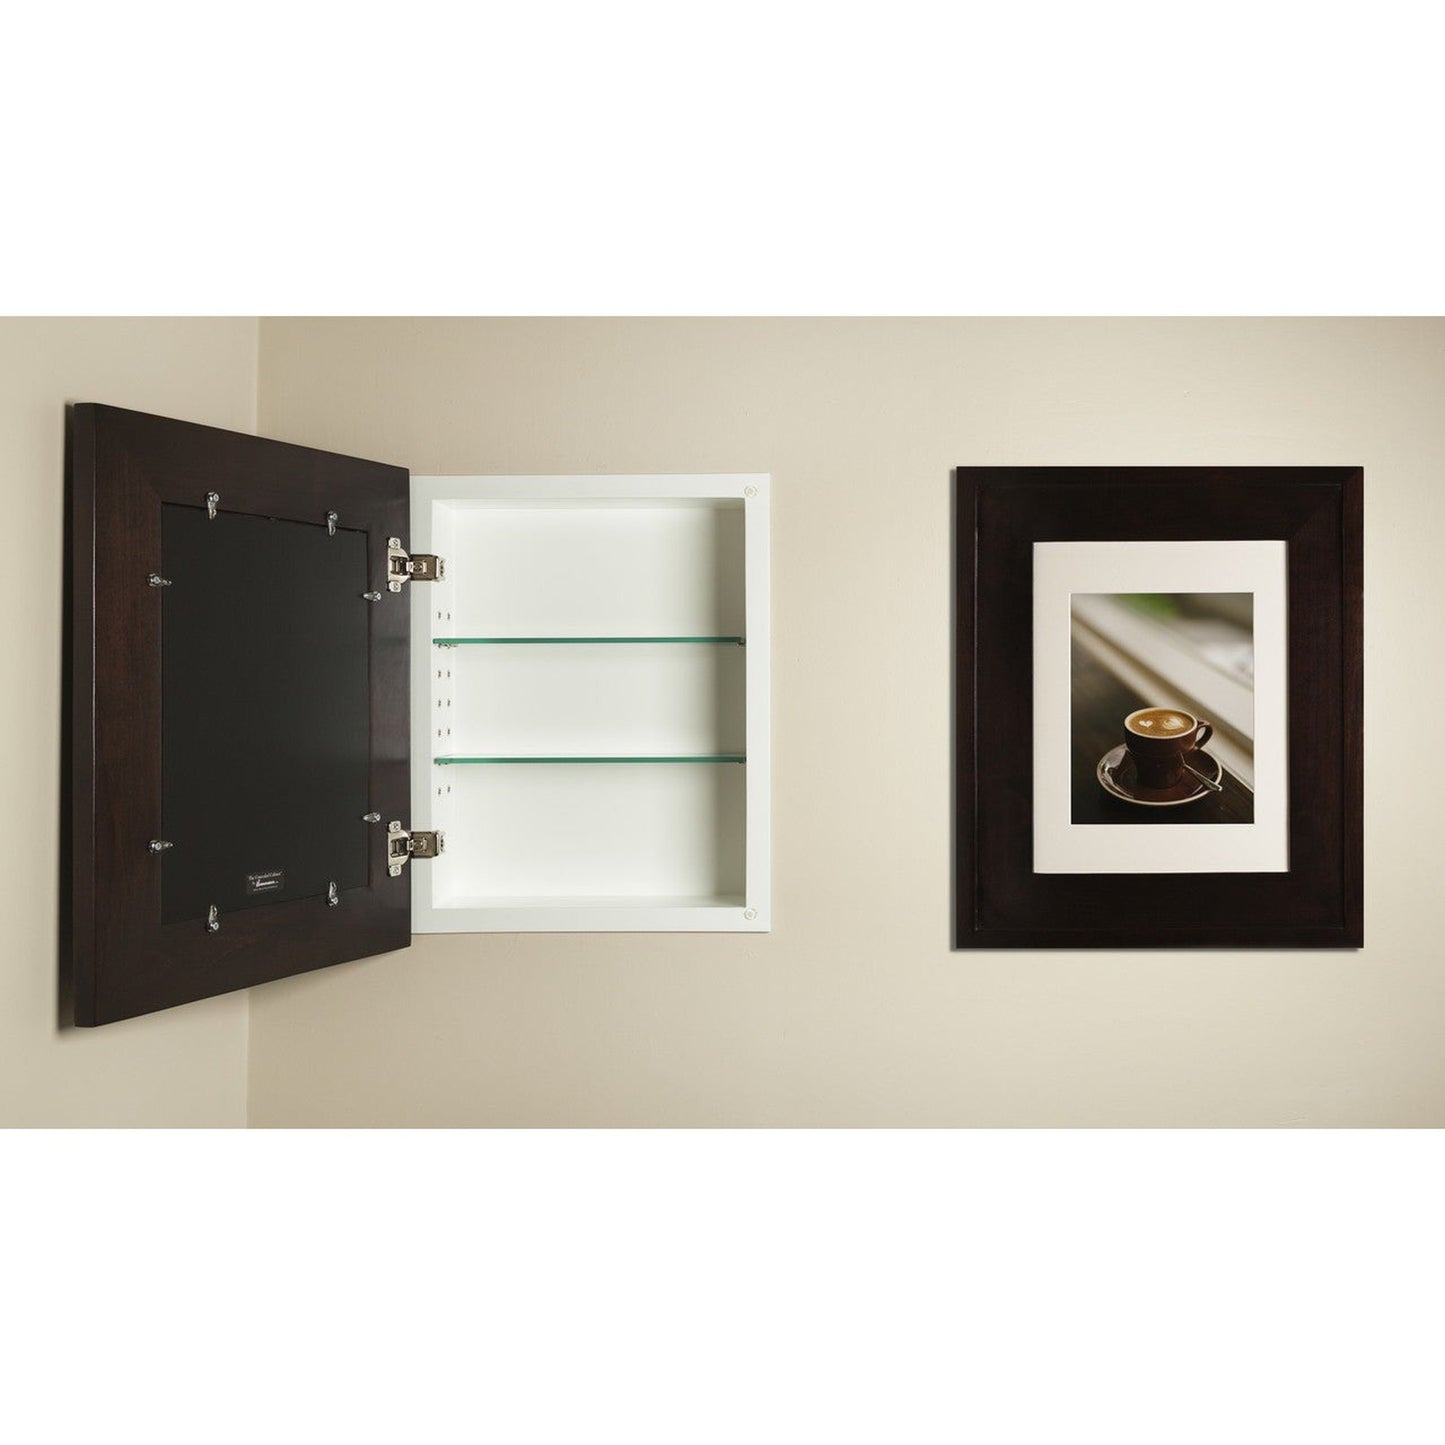 Fox Hollow Furnishings 14" x 16" Coffee Bean Regular Special 3" Depth Recessed Picture Frame Medicine Cabinet With White Matting